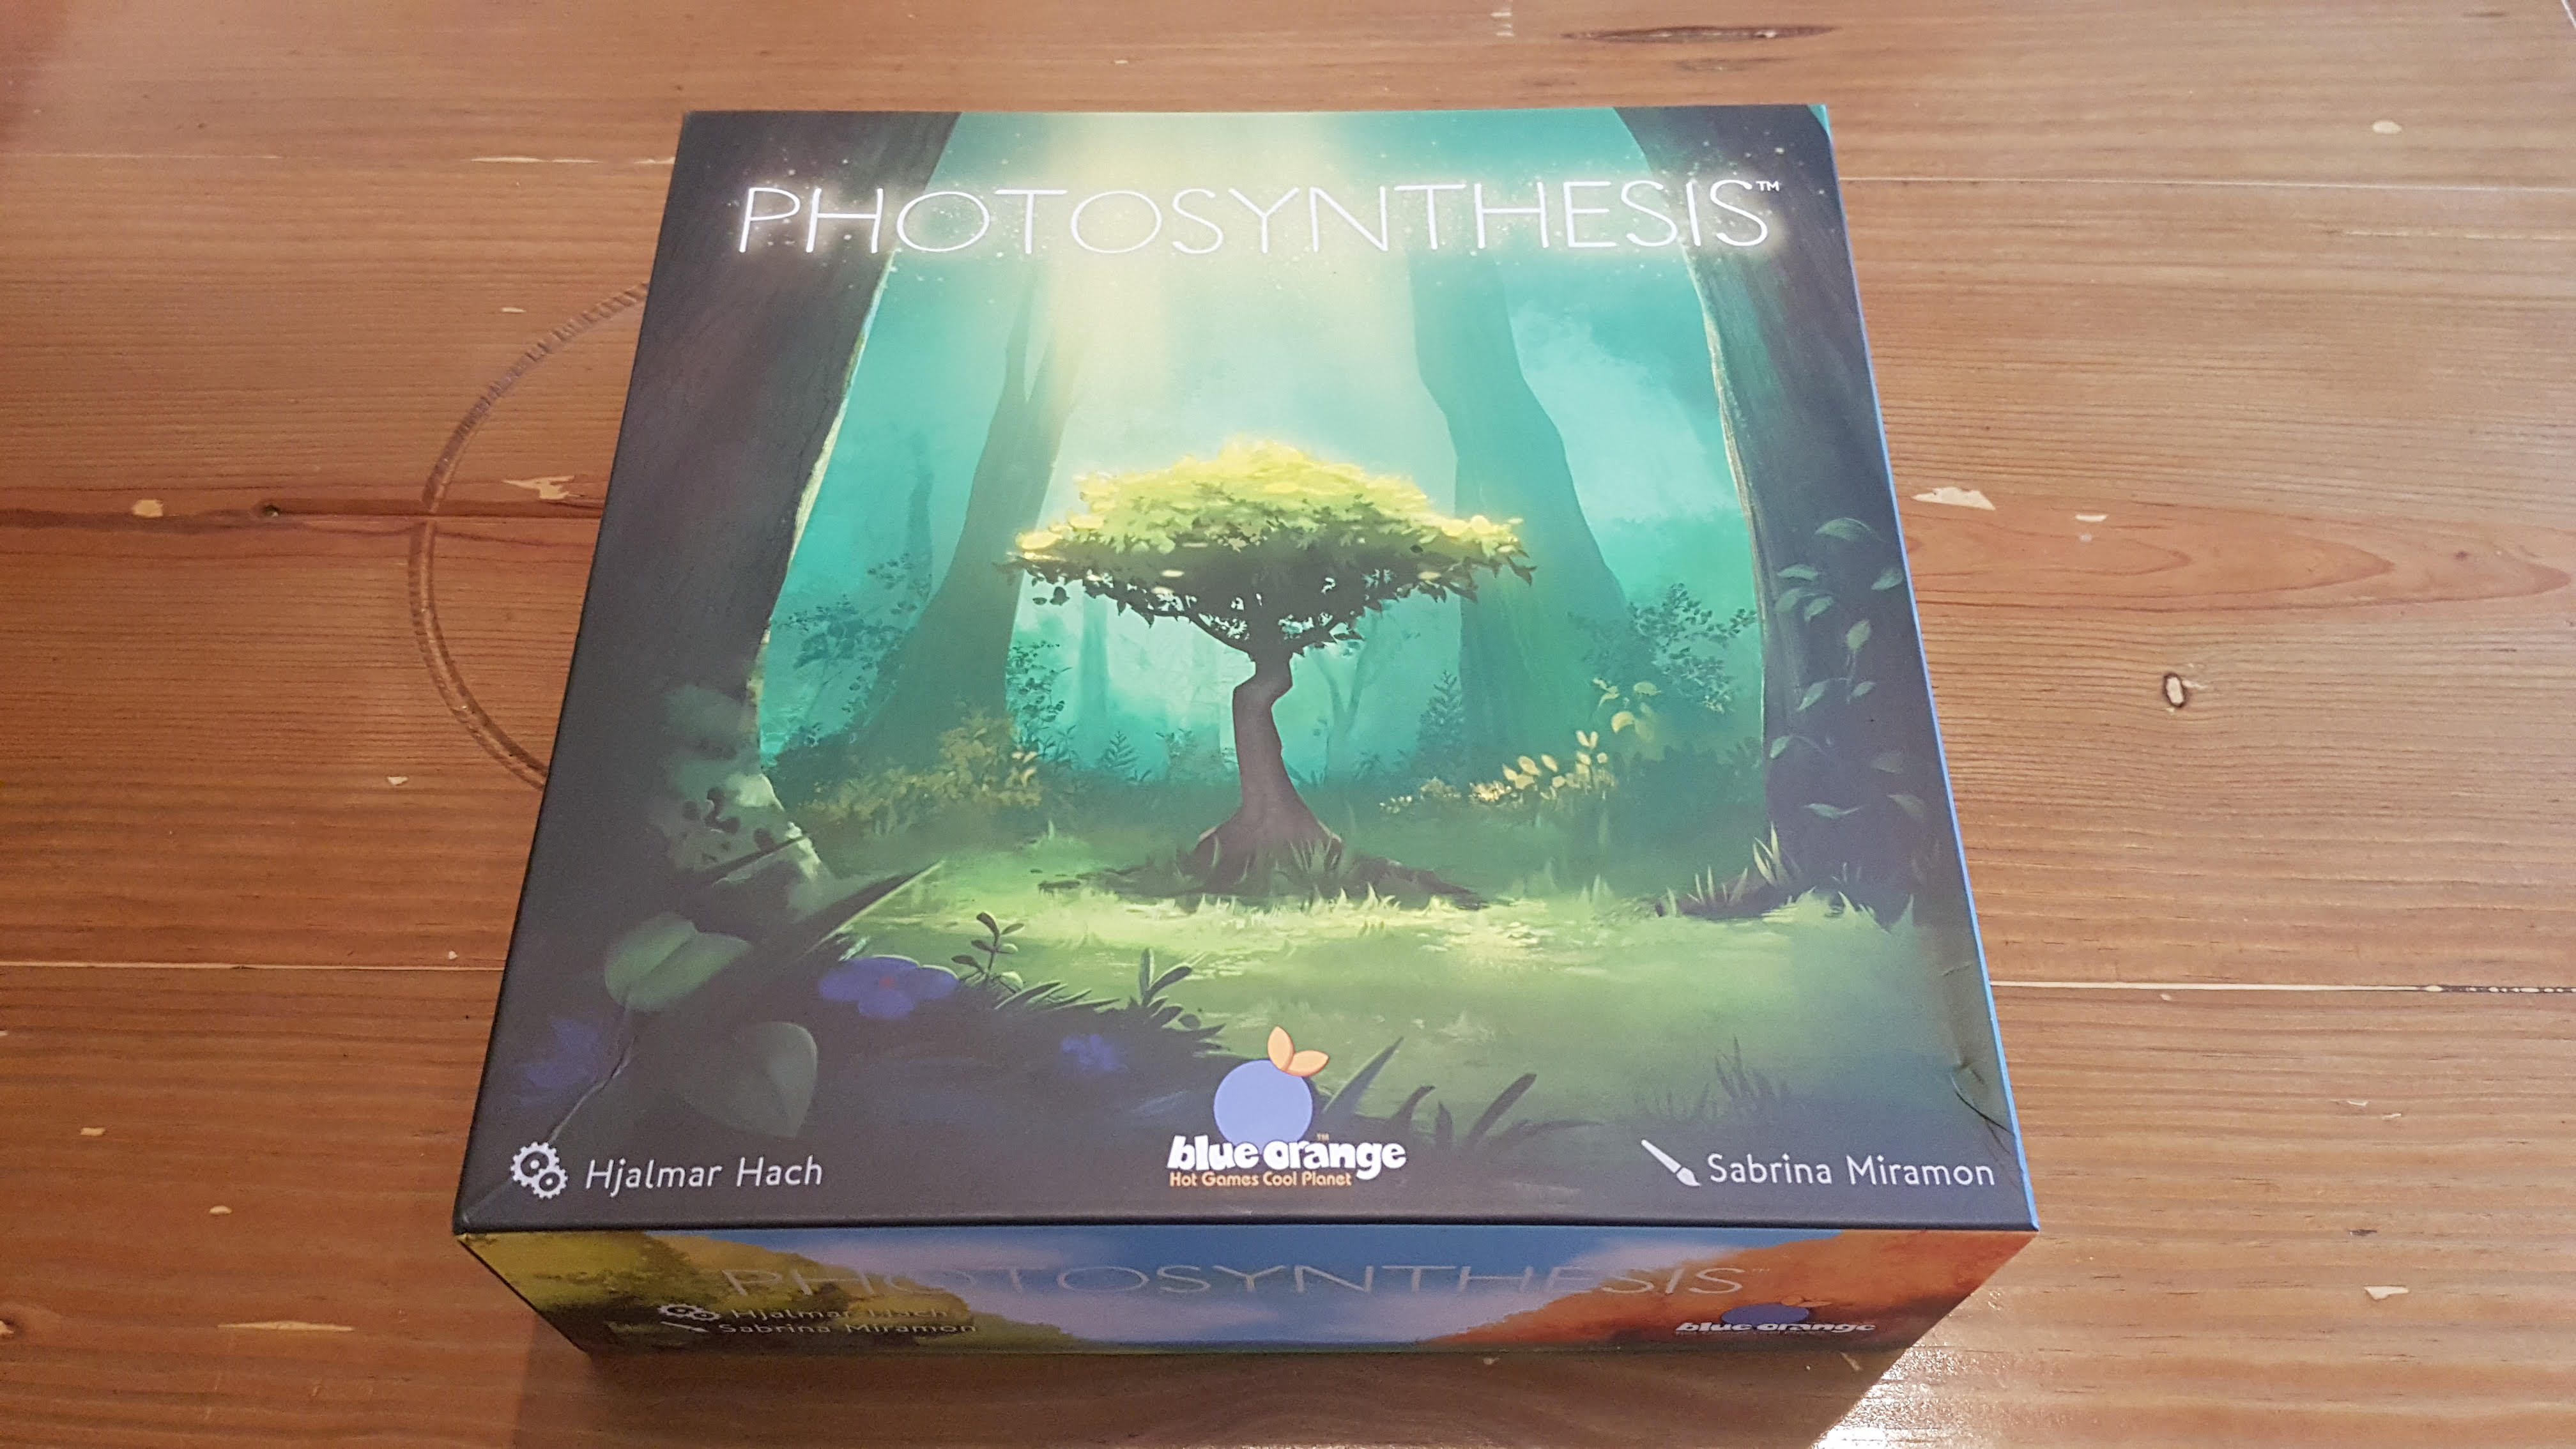 Photosynthesis Review – A Puzzle That Grows On You